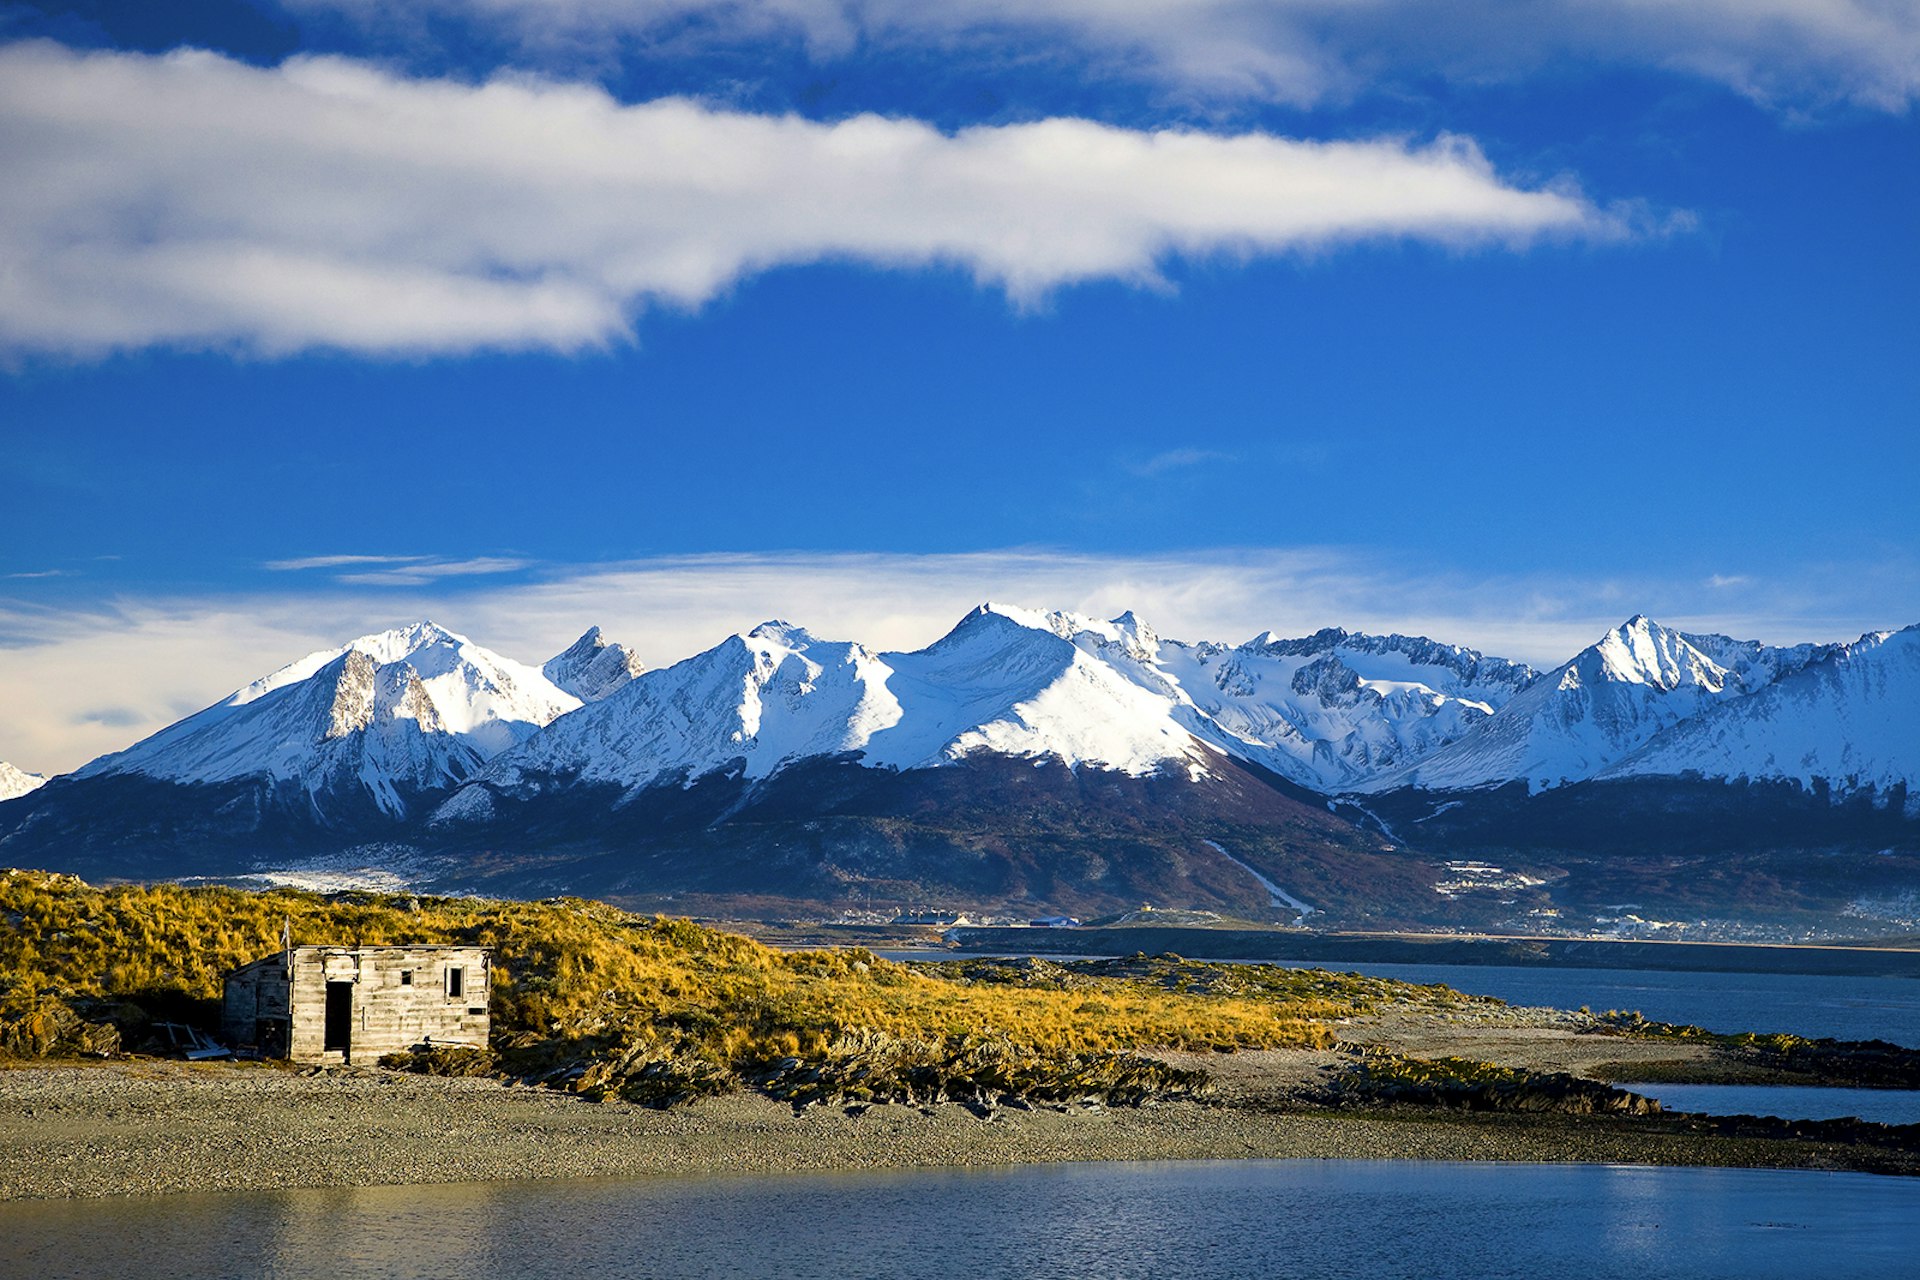 A landscape view of a small building against a backdrop of coastline and snowcapped mountains in Tierra del Fuego, Argentina